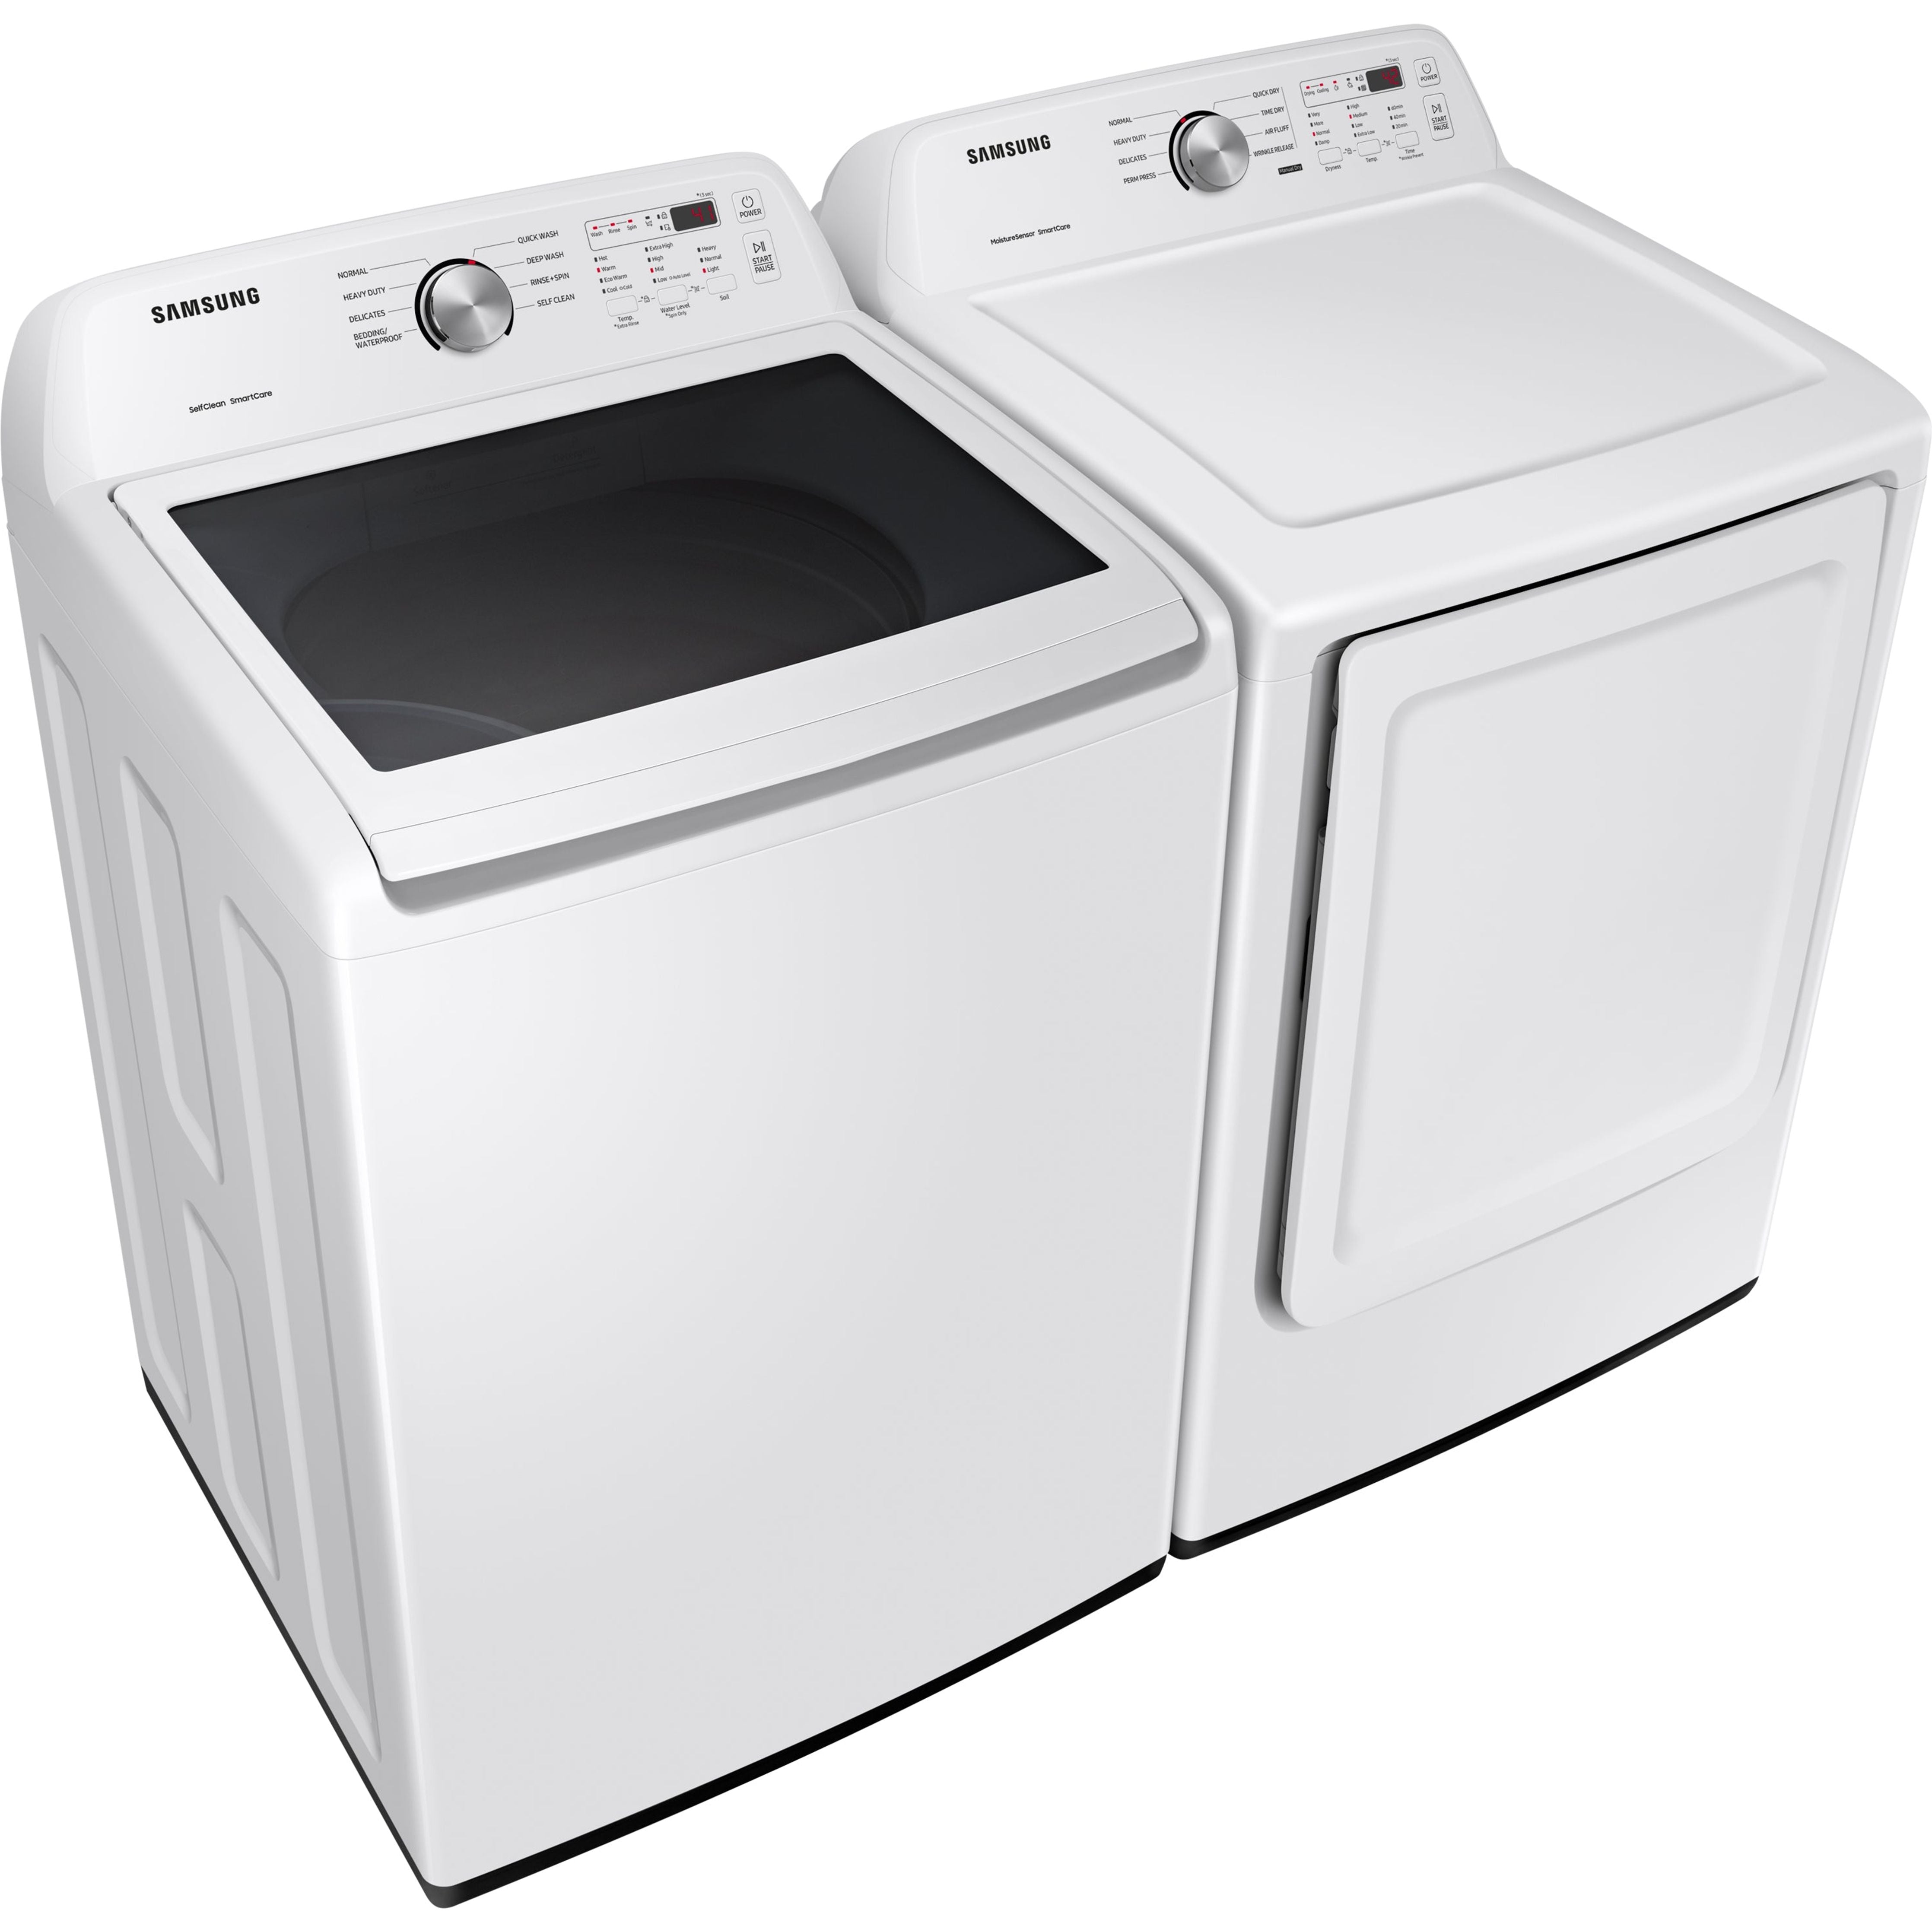 Samsung 7.2 cu.ft. Electric Dryer with Sensor Dry